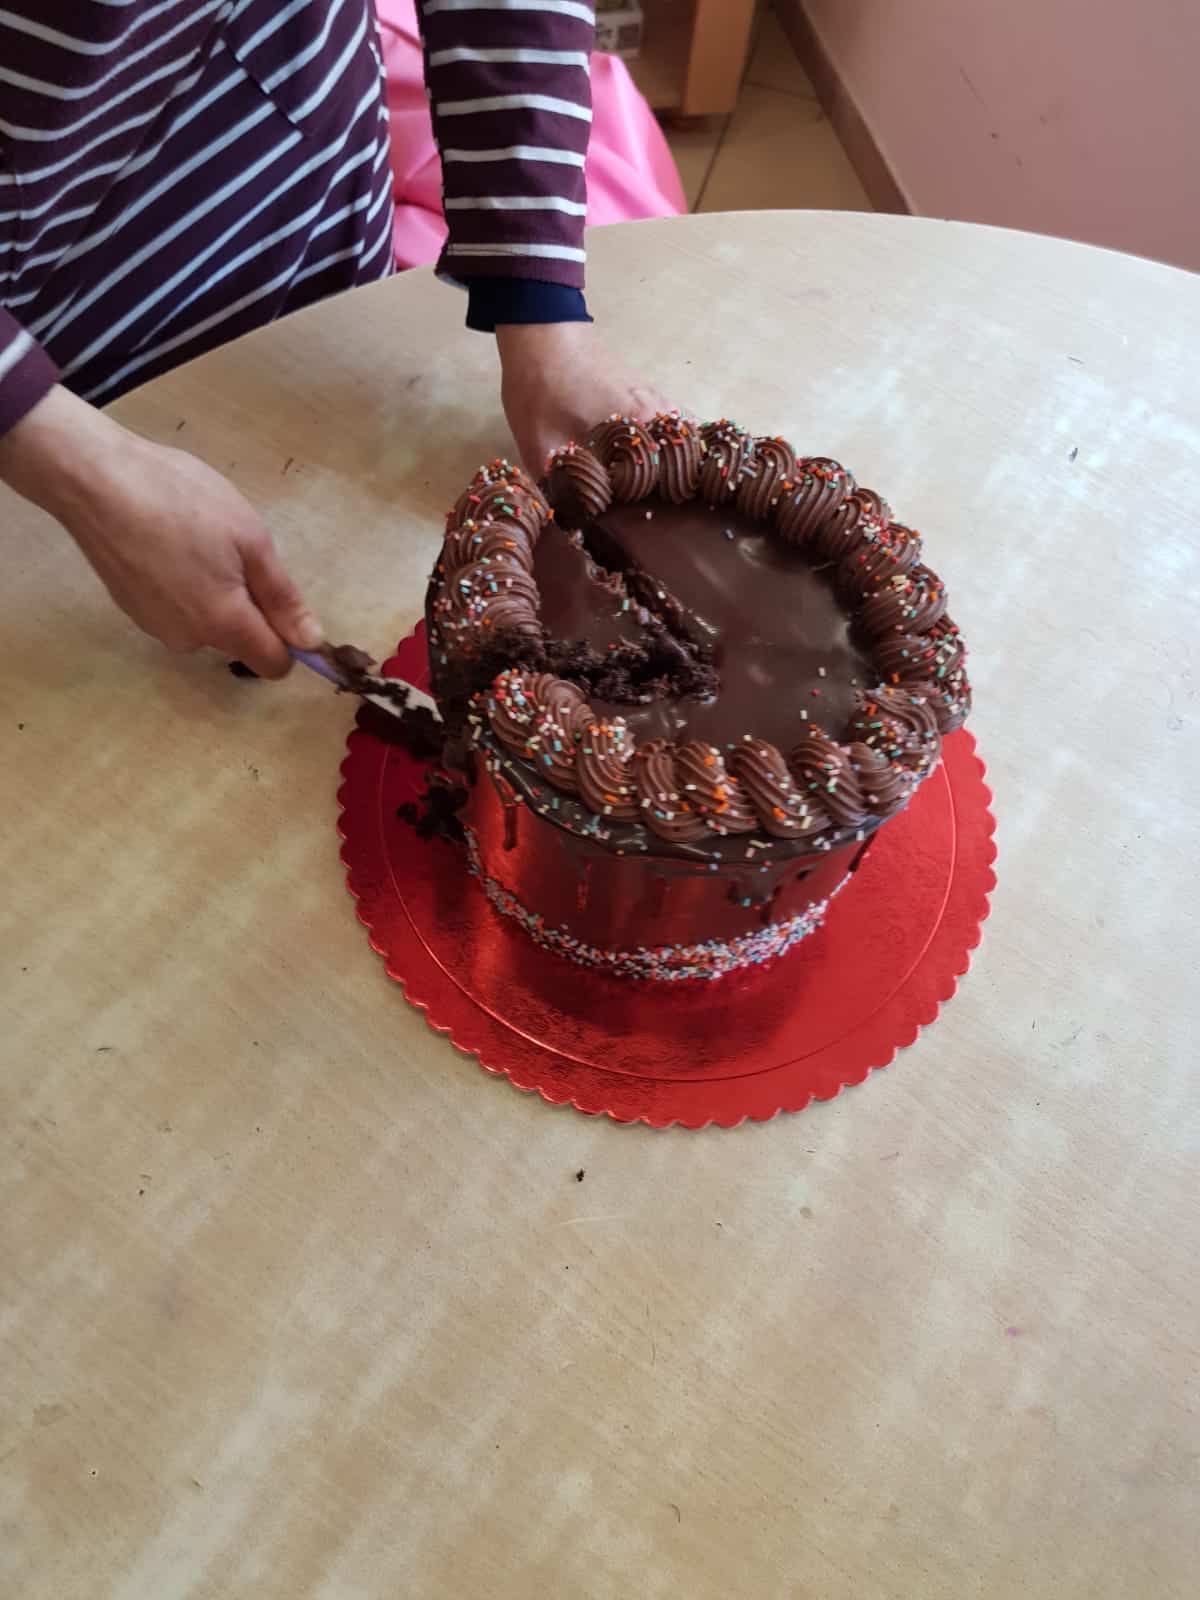 A person cutting a piece of chocolate cake on a table.